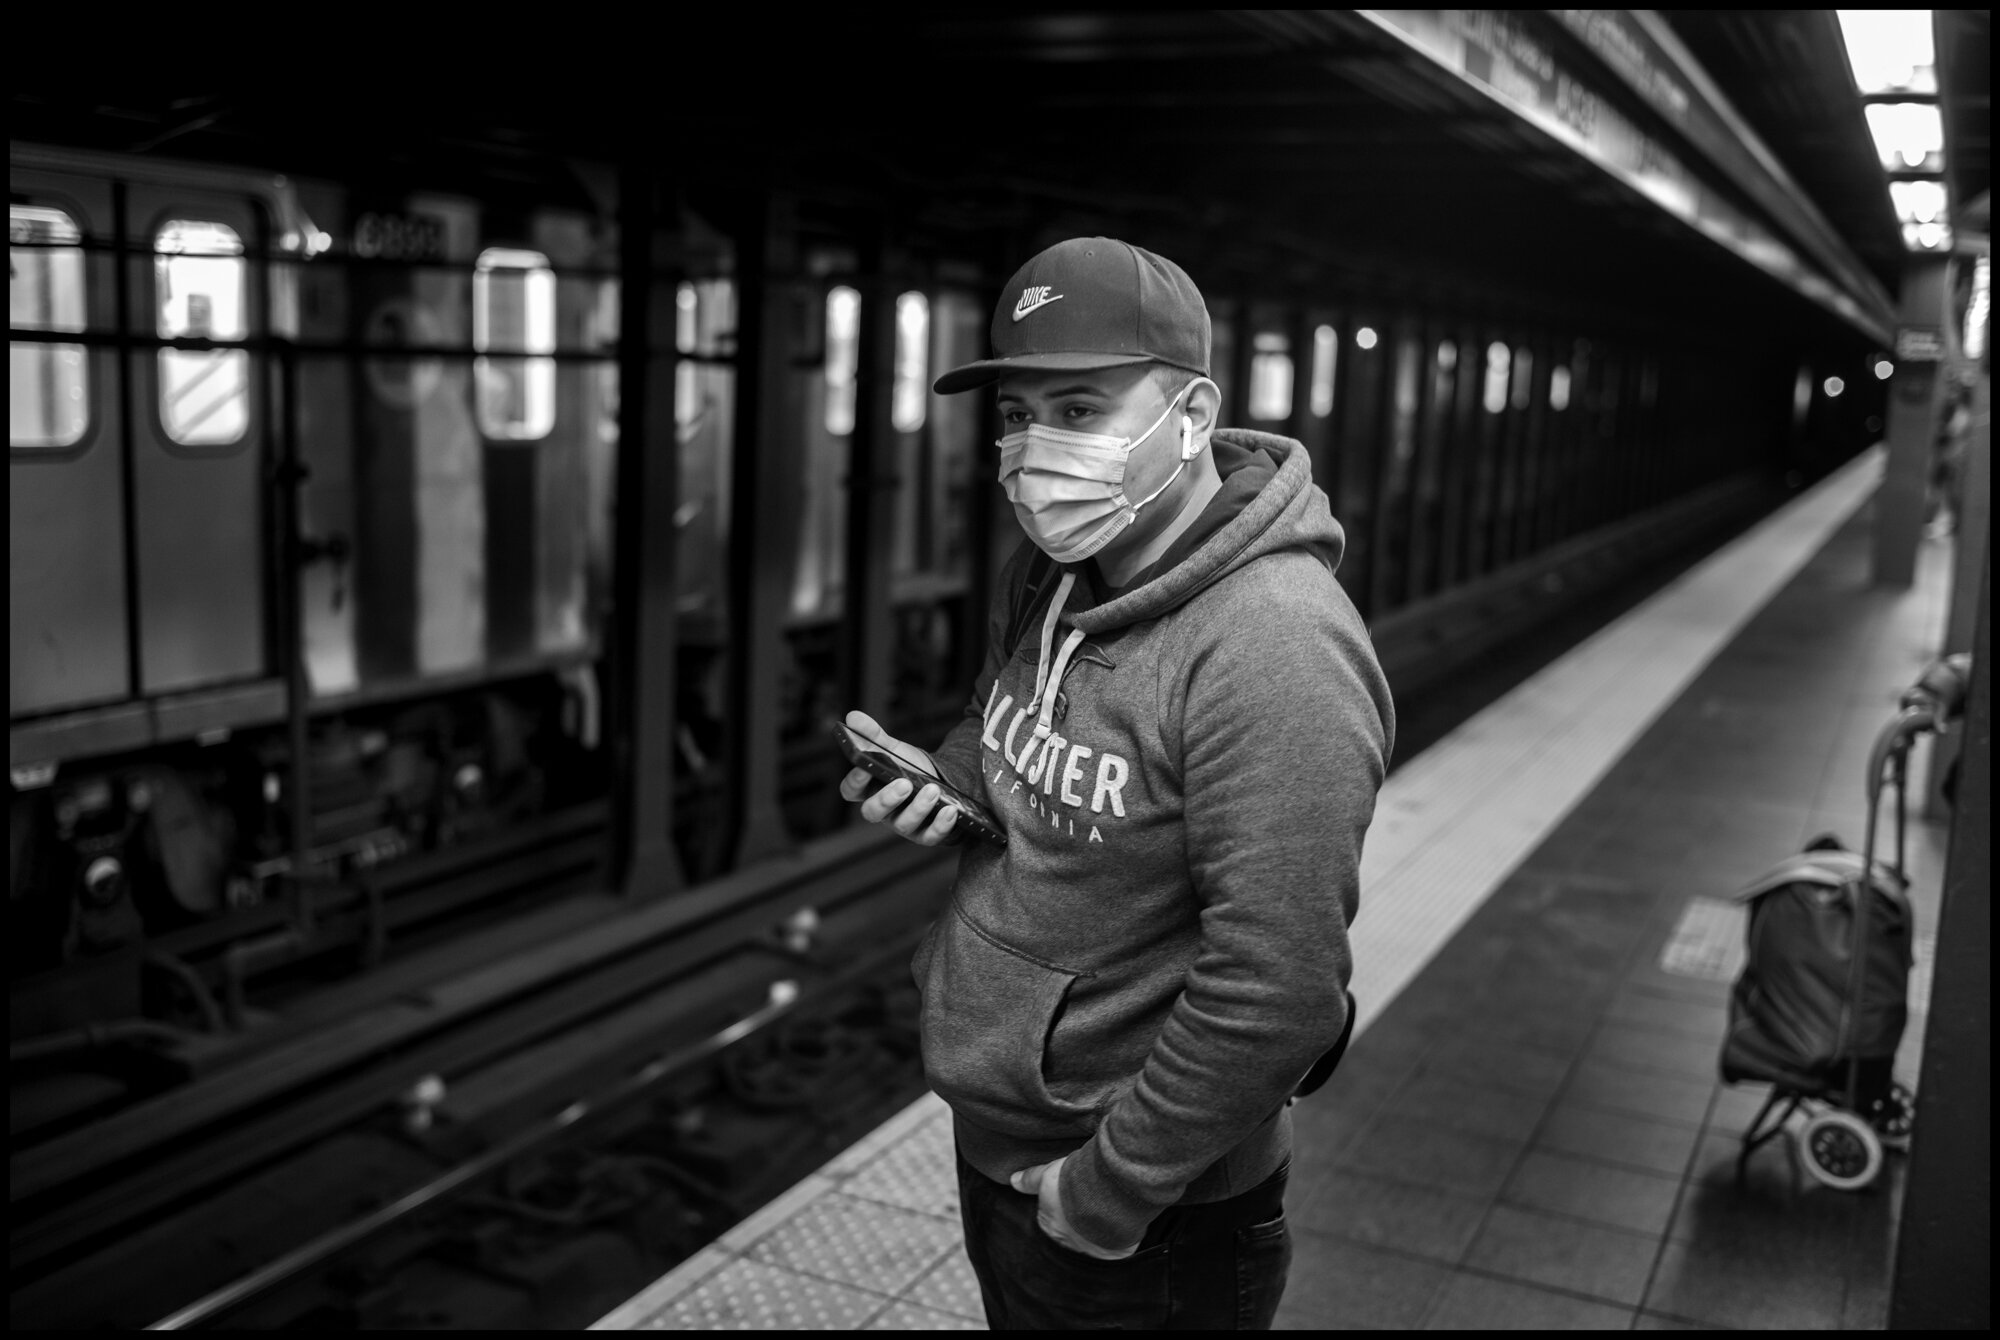  A man waits for a train at Times Square.  March 21, 2020. © Peter Turnley.  ID# 01-006 